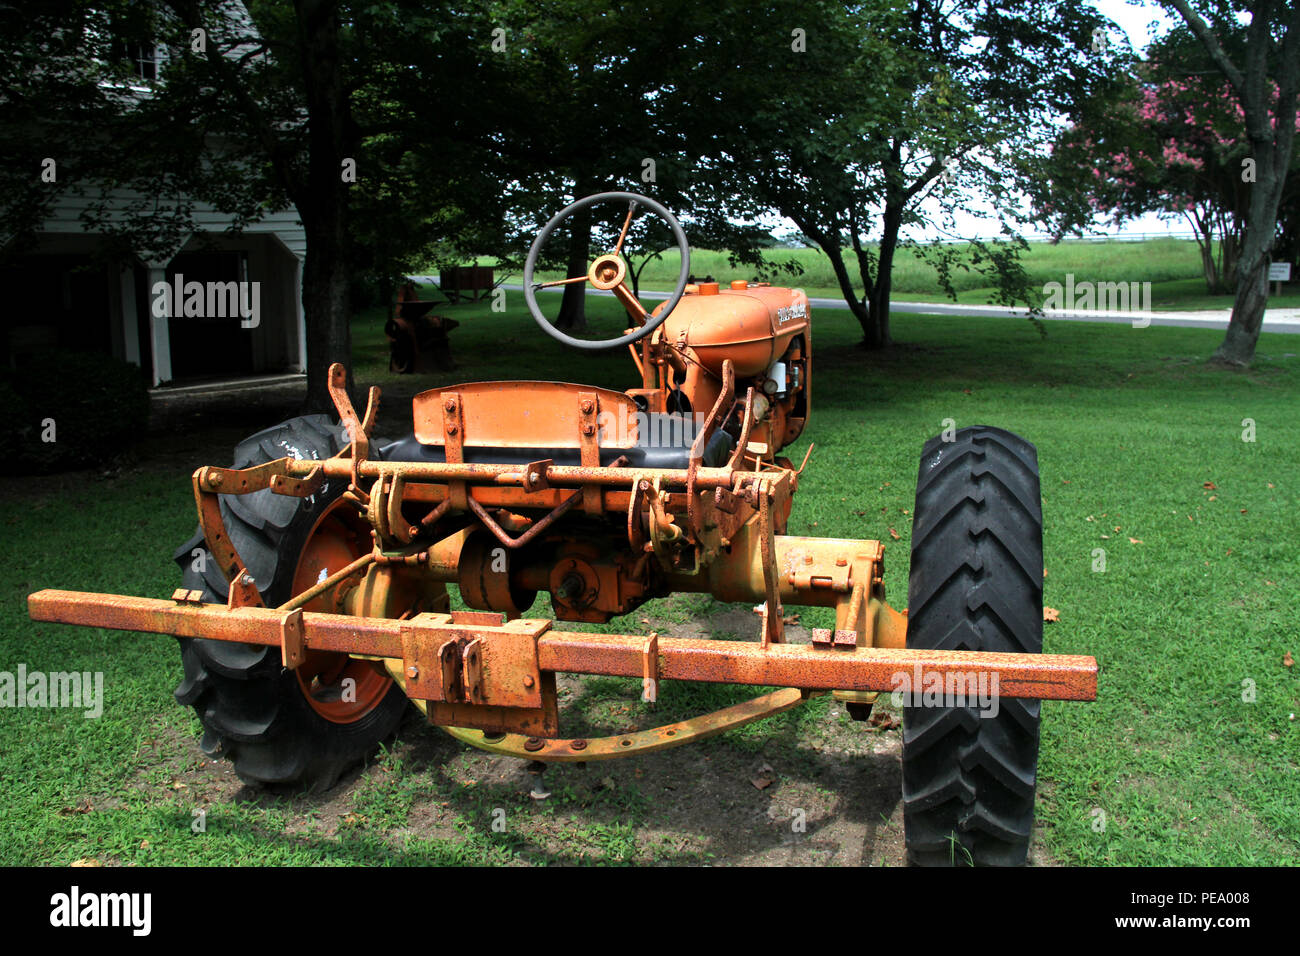 Tractors displayed at Farm and Forestry Museum at Chippokes Plantation, VA, USA Stock Photo